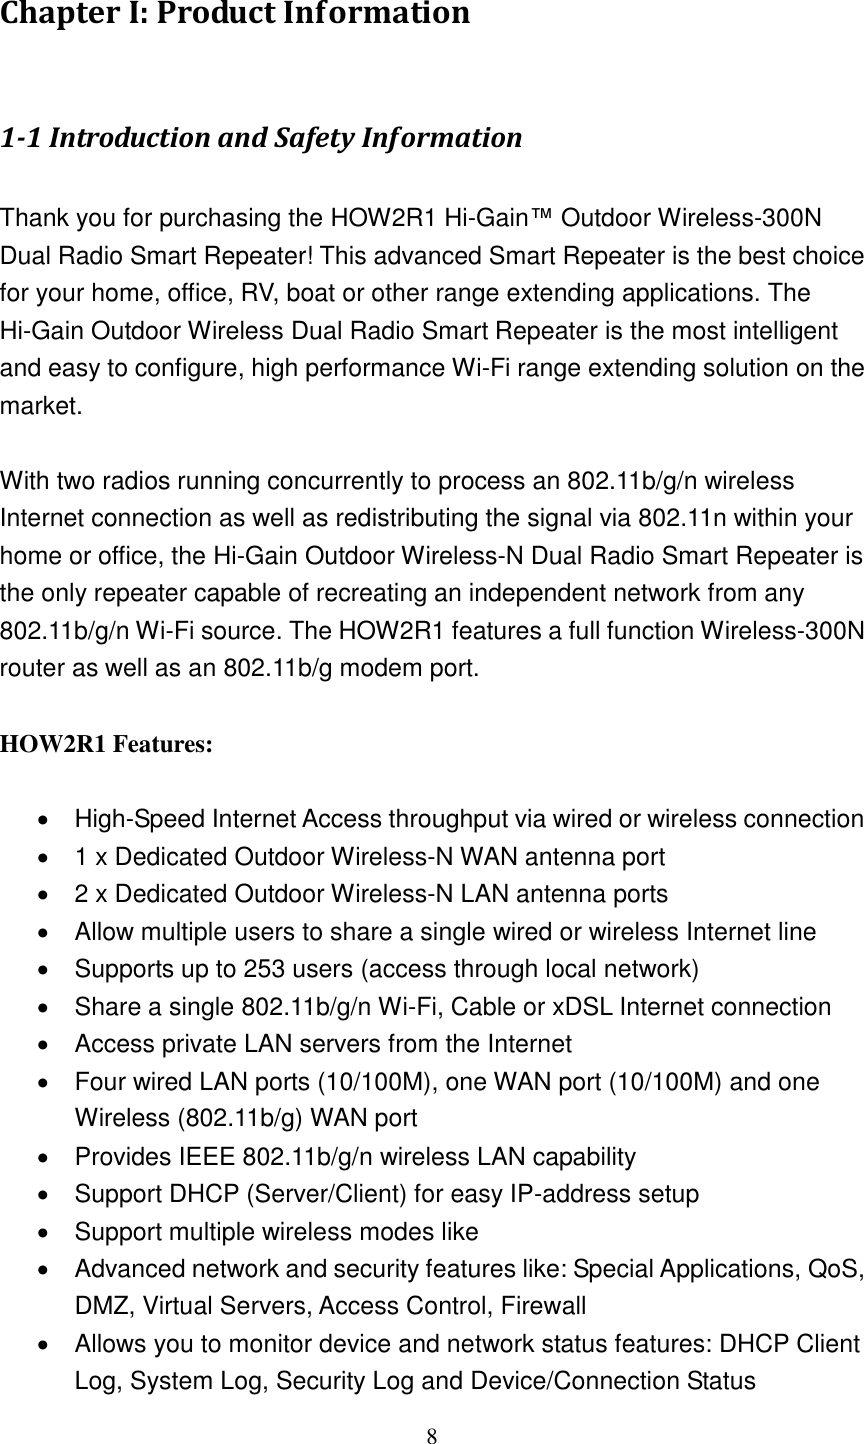 8 Chapter I: Product Information  1-1 Introduction and Safety Information  Thank you for purchasing the HOW2R1 Hi-Gain™ Outdoor Wireless-300N Dual Radio Smart Repeater! This advanced Smart Repeater is the best choice for your home, office, RV, boat or other range extending applications. The Hi-Gain Outdoor Wireless Dual Radio Smart Repeater is the most intelligent and easy to configure, high performance Wi-Fi range extending solution on the market.      With two radios running concurrently to process an 802.11b/g/n wireless Internet connection as well as redistributing the signal via 802.11n within your home or office, the Hi-Gain Outdoor Wireless-N Dual Radio Smart Repeater is the only repeater capable of recreating an independent network from any 802.11b/g/n Wi-Fi source. The HOW2R1 features a full function Wireless-300N router as well as an 802.11b/g modem port.  HOW2R1 Features:    High-Speed Internet Access throughput via wired or wireless connection   1 x Dedicated Outdoor Wireless-N WAN antenna port   2 x Dedicated Outdoor Wireless-N LAN antenna ports   Allow multiple users to share a single wired or wireless Internet line     Supports up to 253 users (access through local network)   Share a single 802.11b/g/n Wi-Fi, Cable or xDSL Internet connection   Access private LAN servers from the Internet   Four wired LAN ports (10/100M), one WAN port (10/100M) and one Wireless (802.11b/g) WAN port   Provides IEEE 802.11b/g/n wireless LAN capability   Support DHCP (Server/Client) for easy IP-address setup     Support multiple wireless modes like   Advanced network and security features like: Special Applications, QoS, DMZ, Virtual Servers, Access Control, Firewall   Allows you to monitor device and network status features: DHCP Client Log, System Log, Security Log and Device/Connection Status 